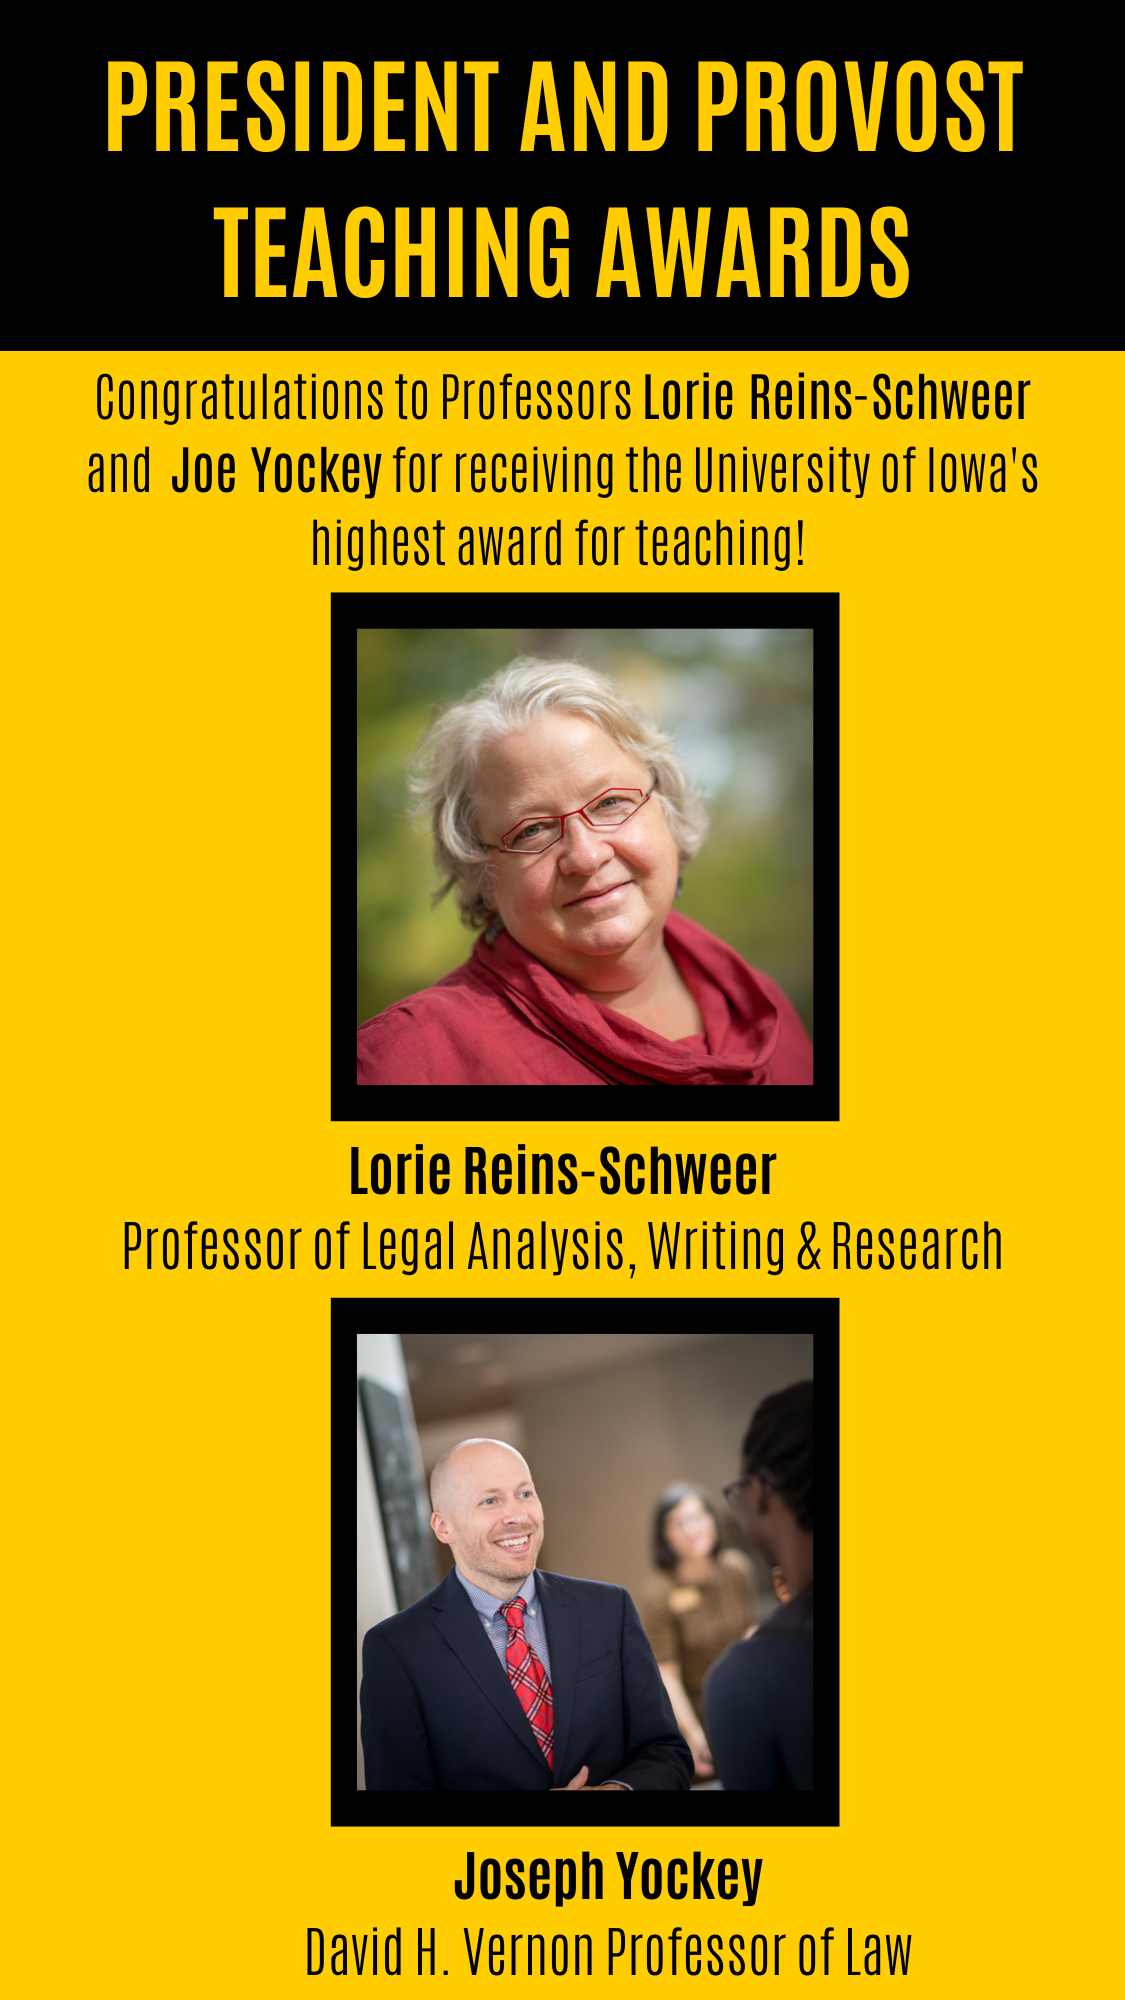  PRESIDENT AND PROVOST TEACHING AWARDS Congratulations to Professors Lorie Reins-Schweer and  Joe Yockey for receiving the University of Iowa's highest award for teaching! Lorie Reins-Schweer Professor of Legal Analysis, Writing & Research Joseph Yockey David H. Vernon Professor of Law